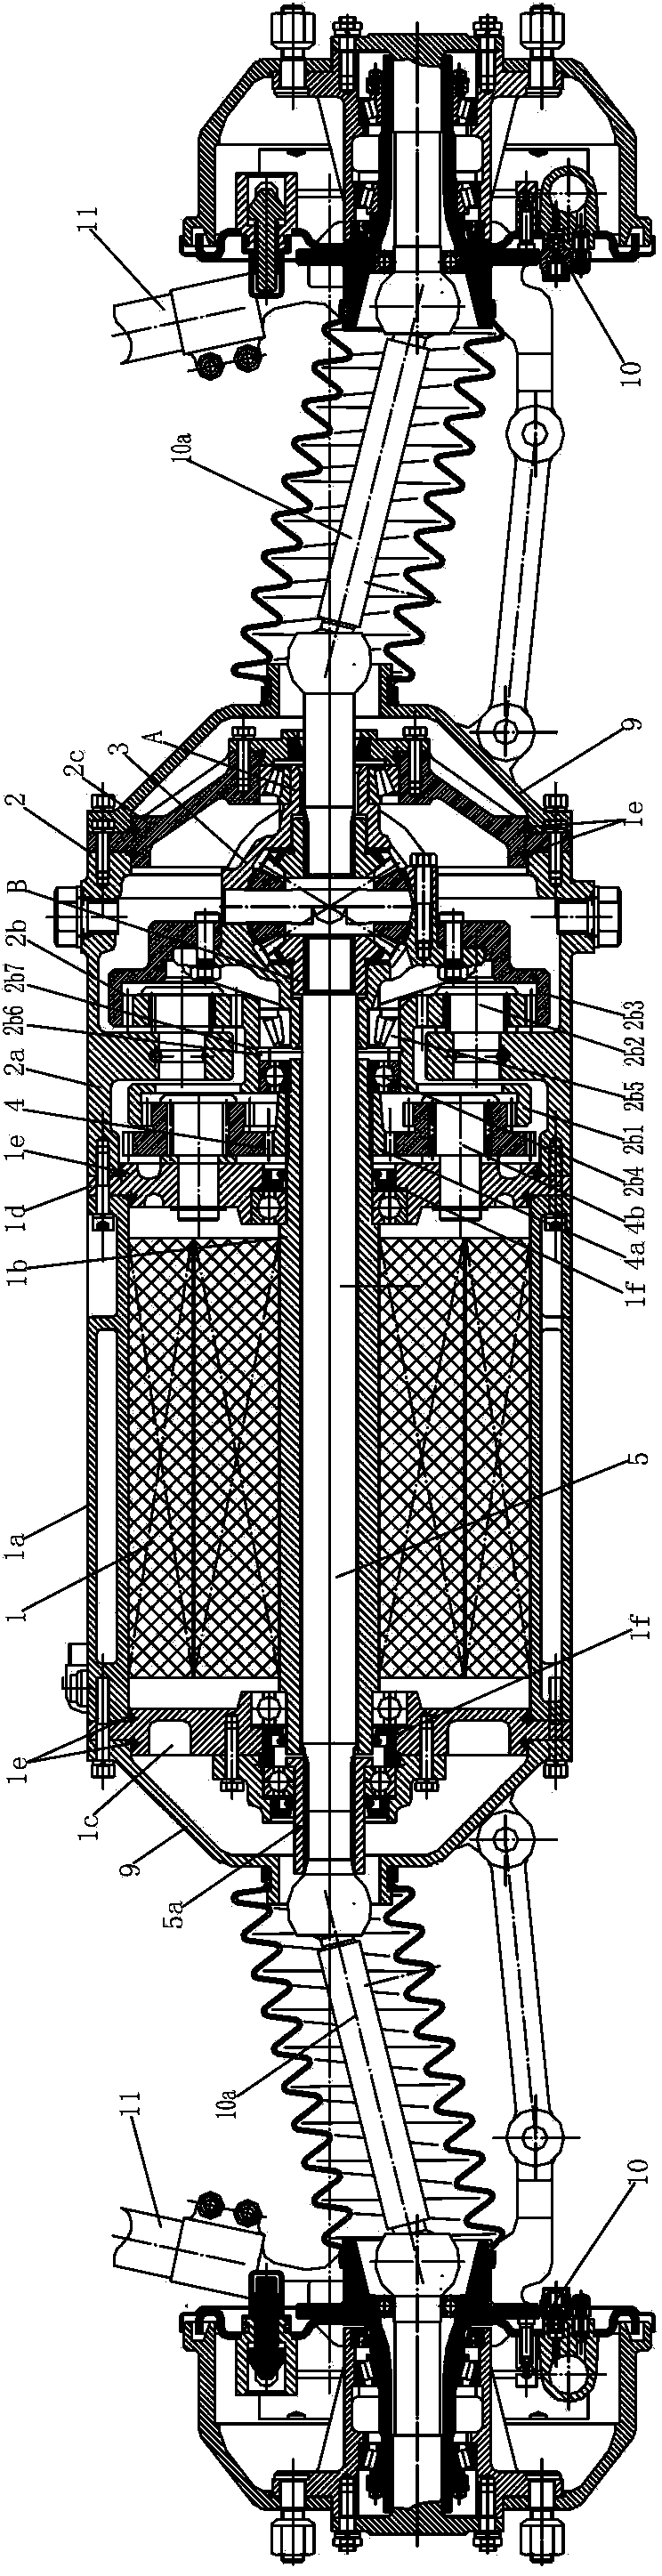 Torque conversion differential assembly of coaxial motor